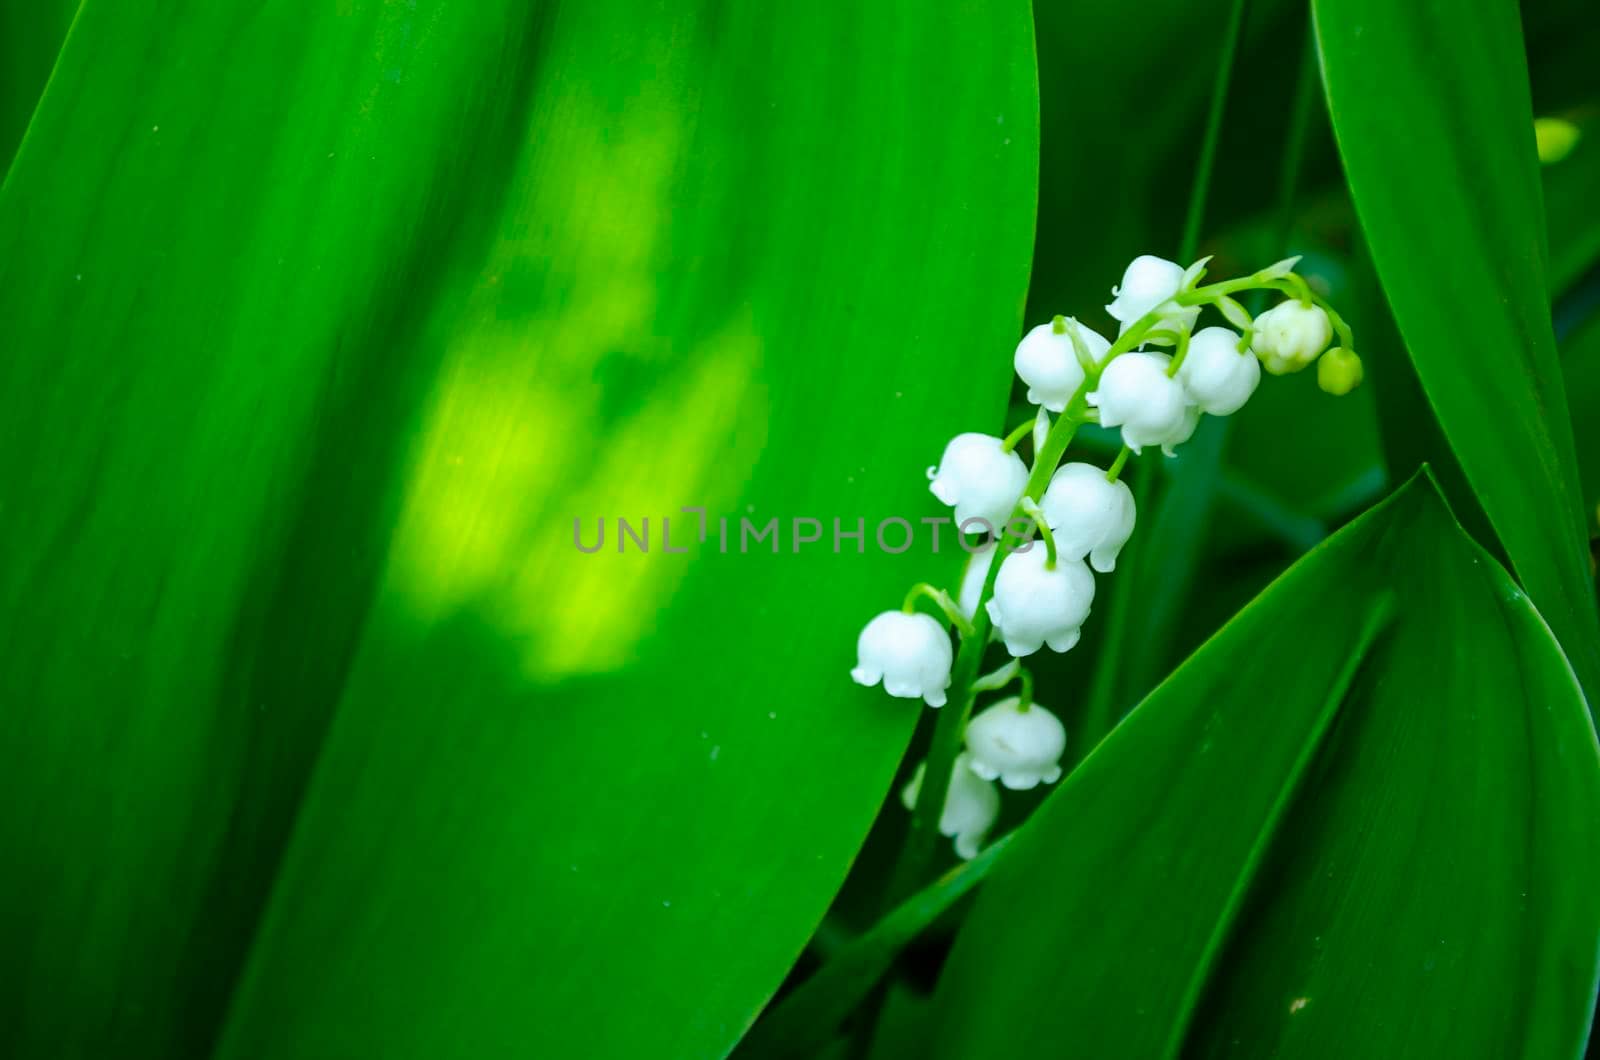 Flower Spring Sun White Green Background May lily of the valley, white flowers on a background of dark green leaves. Spring flower lily of the valley. Lily of the valley. Ecological background Blooming lily of the valley green grass background in the sunlight.